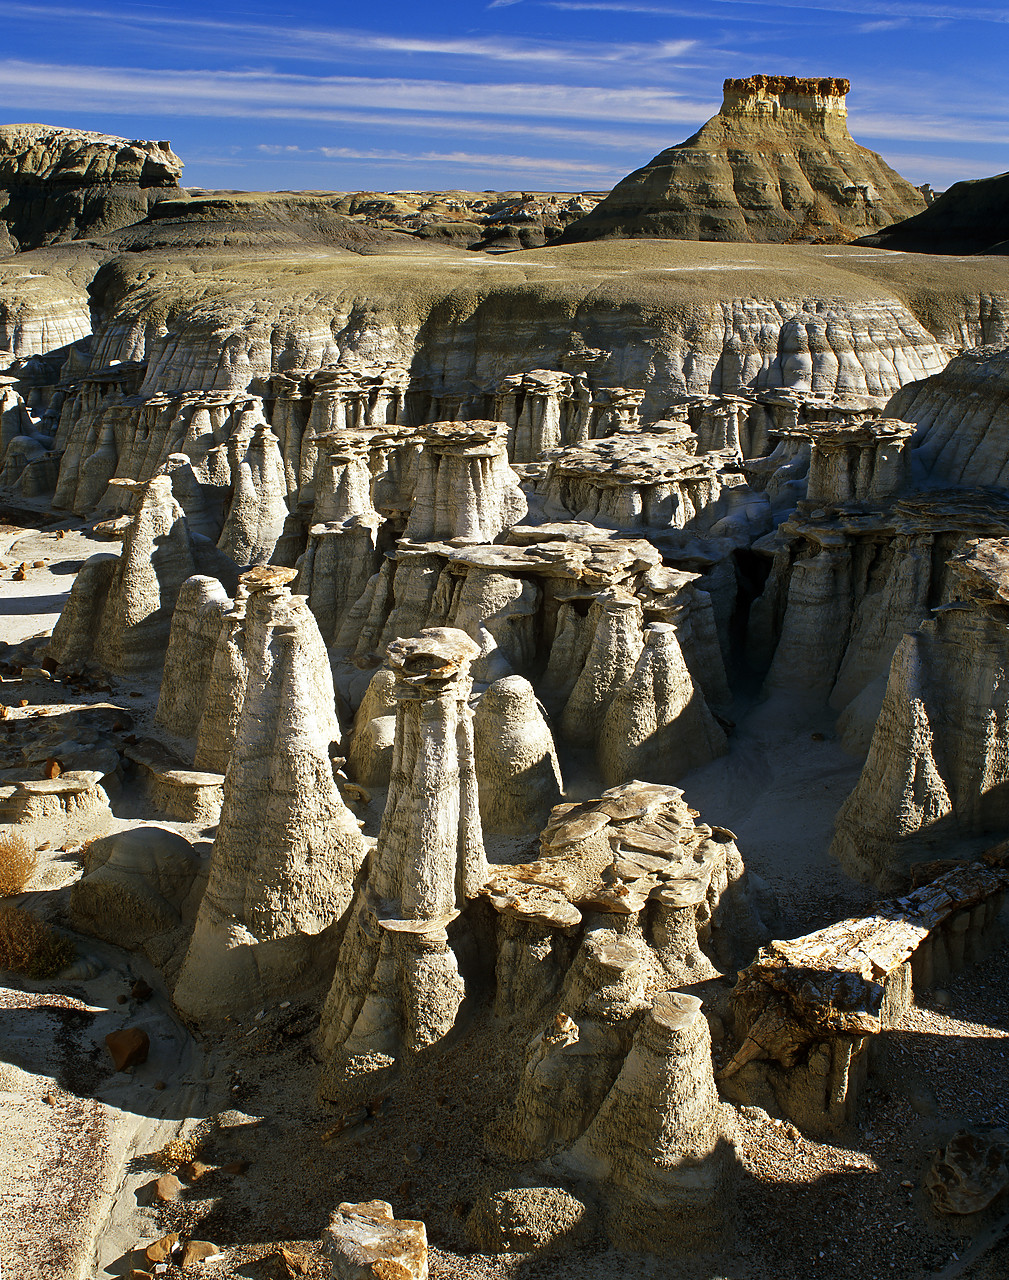 #010746-3 - Valley of Hoodoos, Bisti Wilderness Area, New Mexico, USA